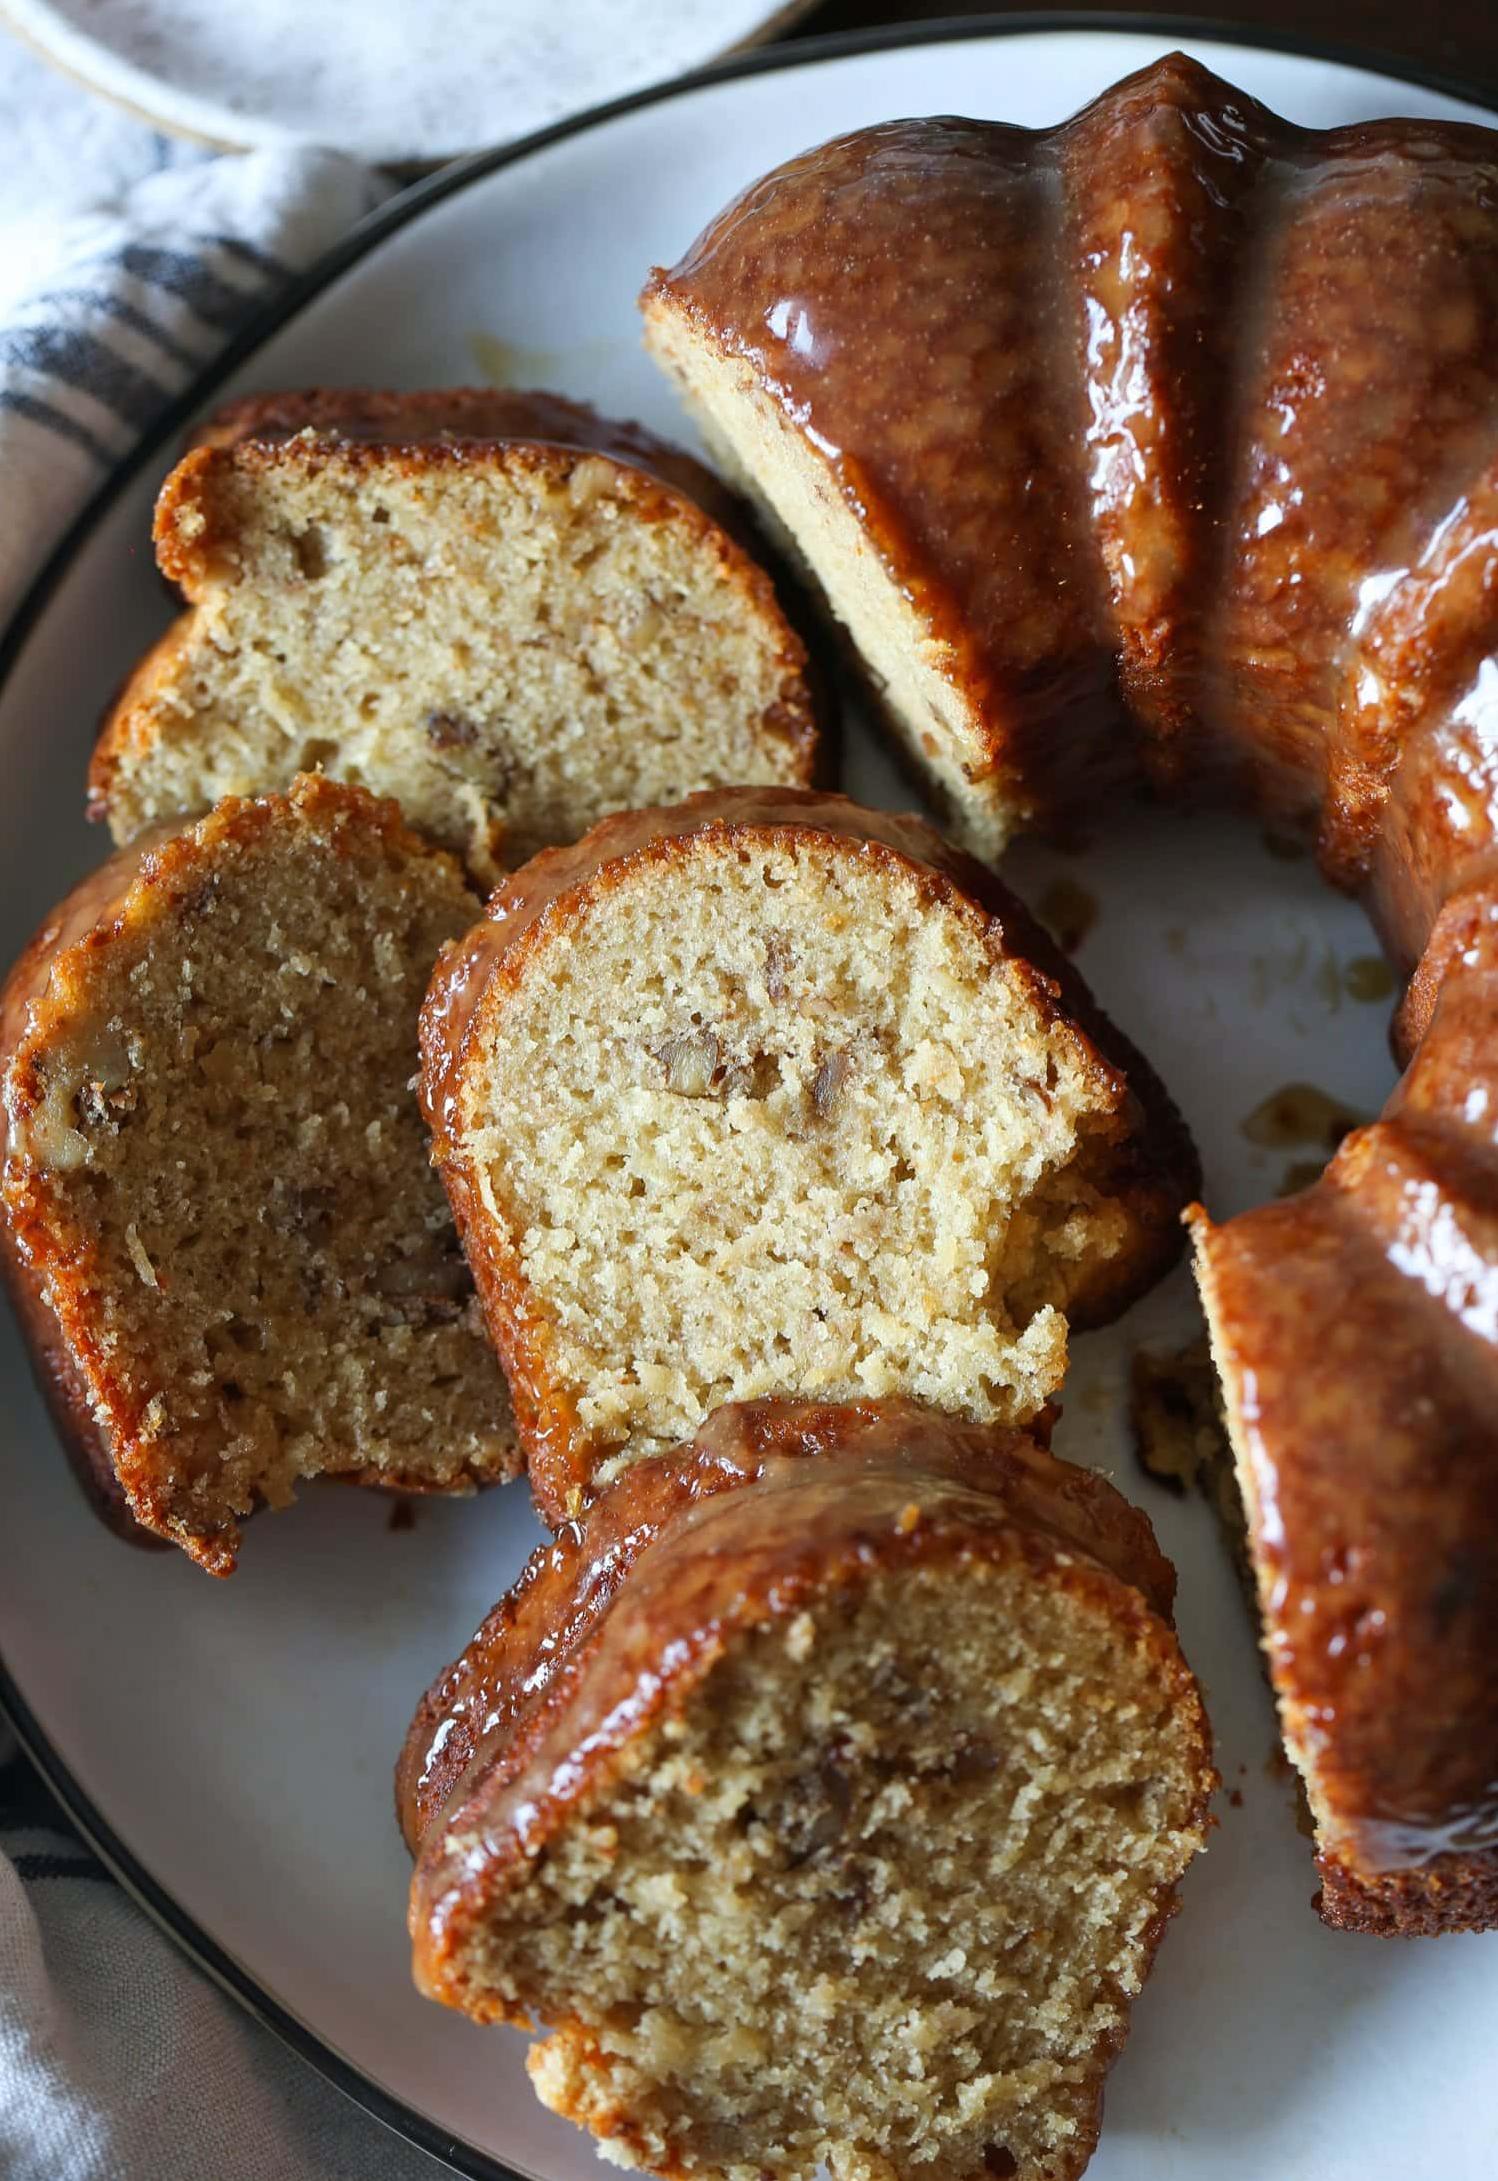  This cake is the perfect excuse to use up overripe bananas.